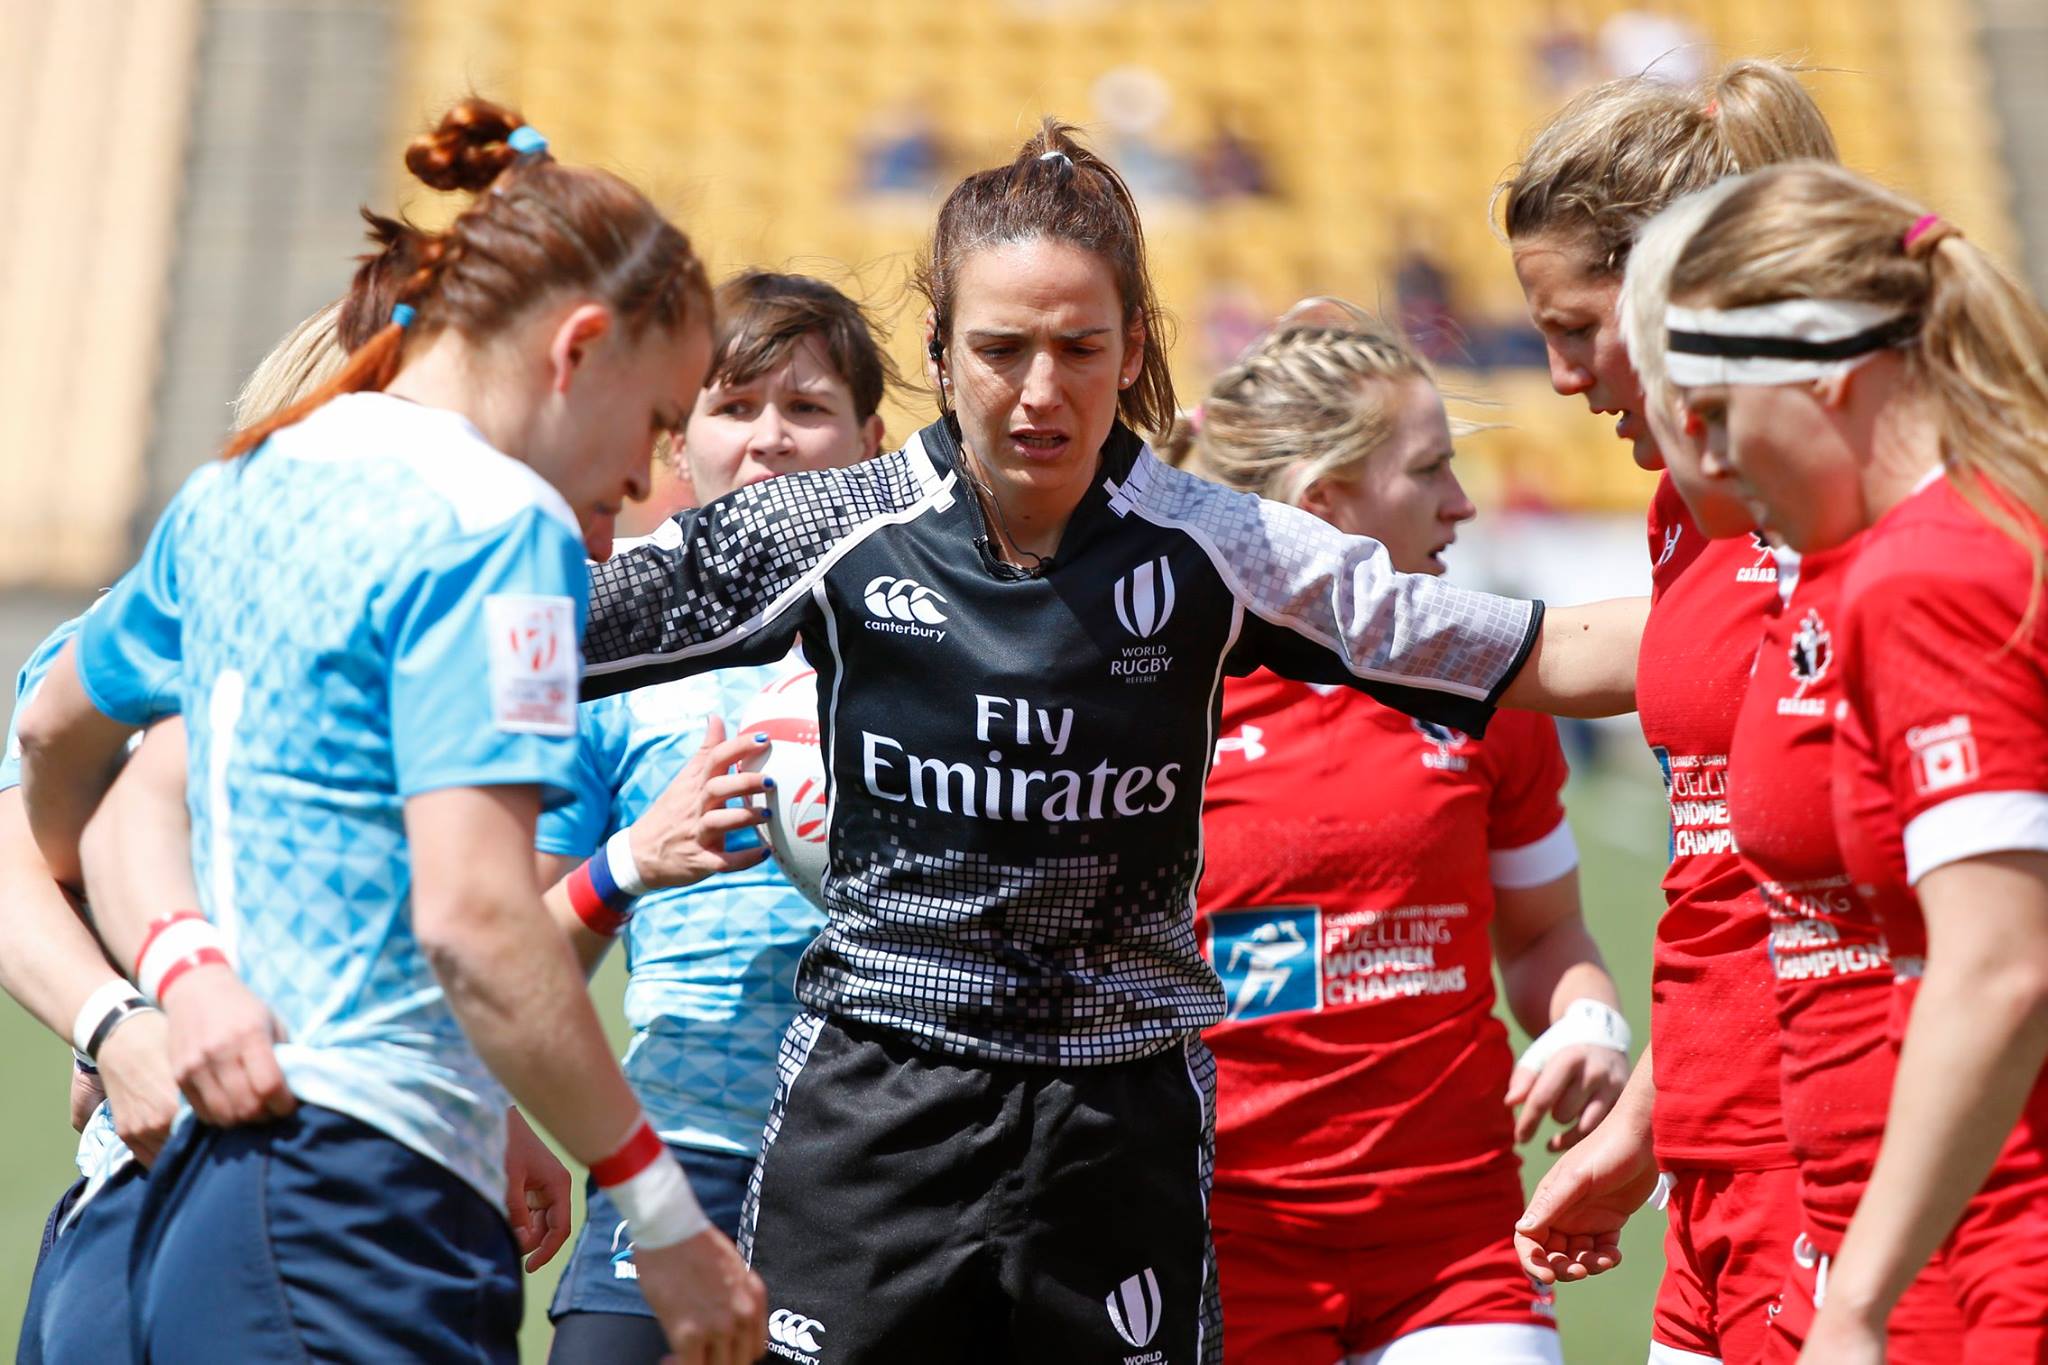 Referee Alhambra Nievas prepares Russia and Canada for a scrum on day one of Atlanta 7s (Photo: Mike Lee @KLC Foto).